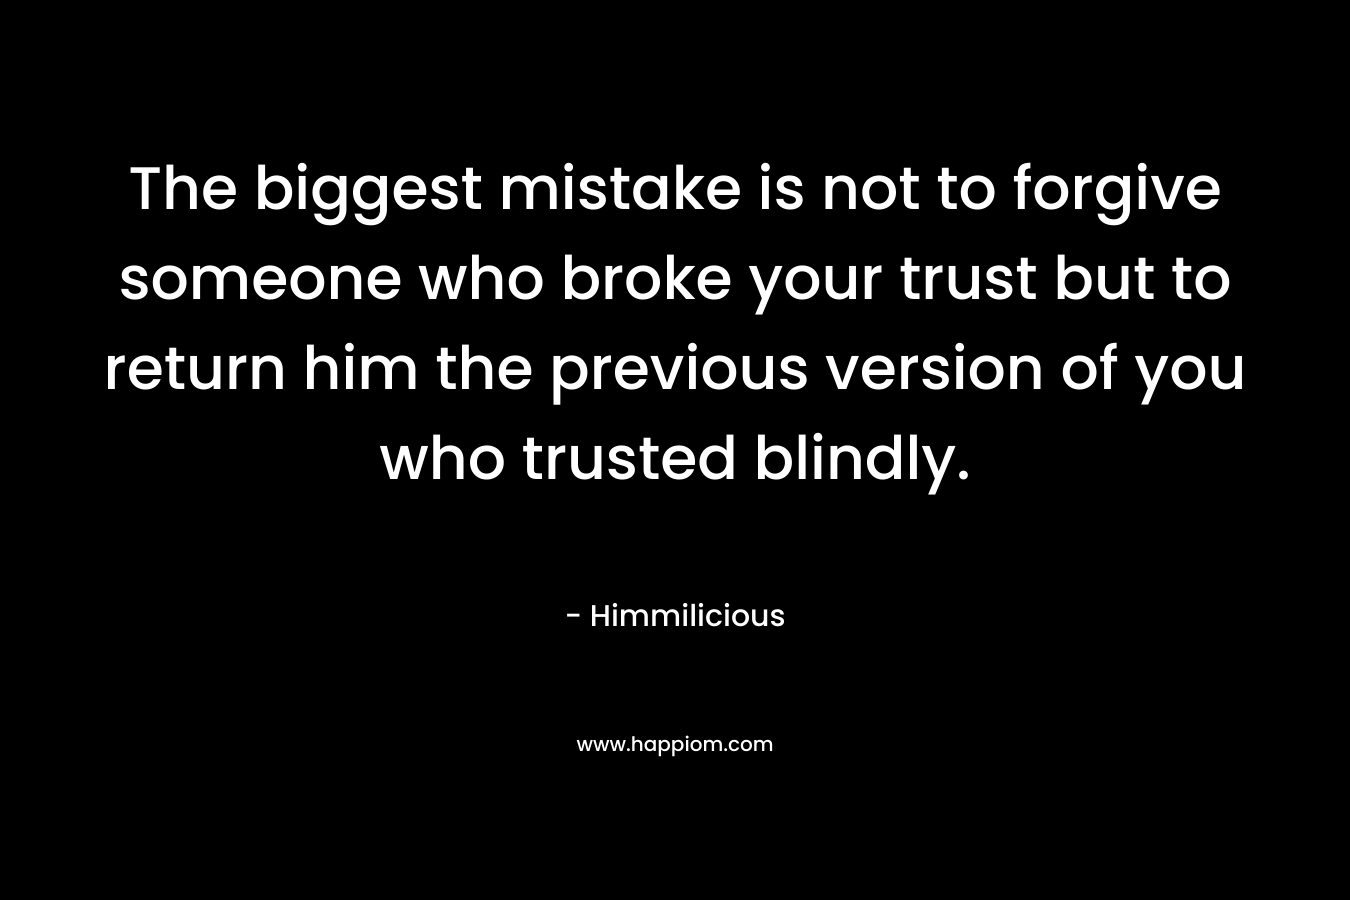 The biggest mistake is not to forgive someone who broke your trust but to return him the previous version of you who trusted blindly.